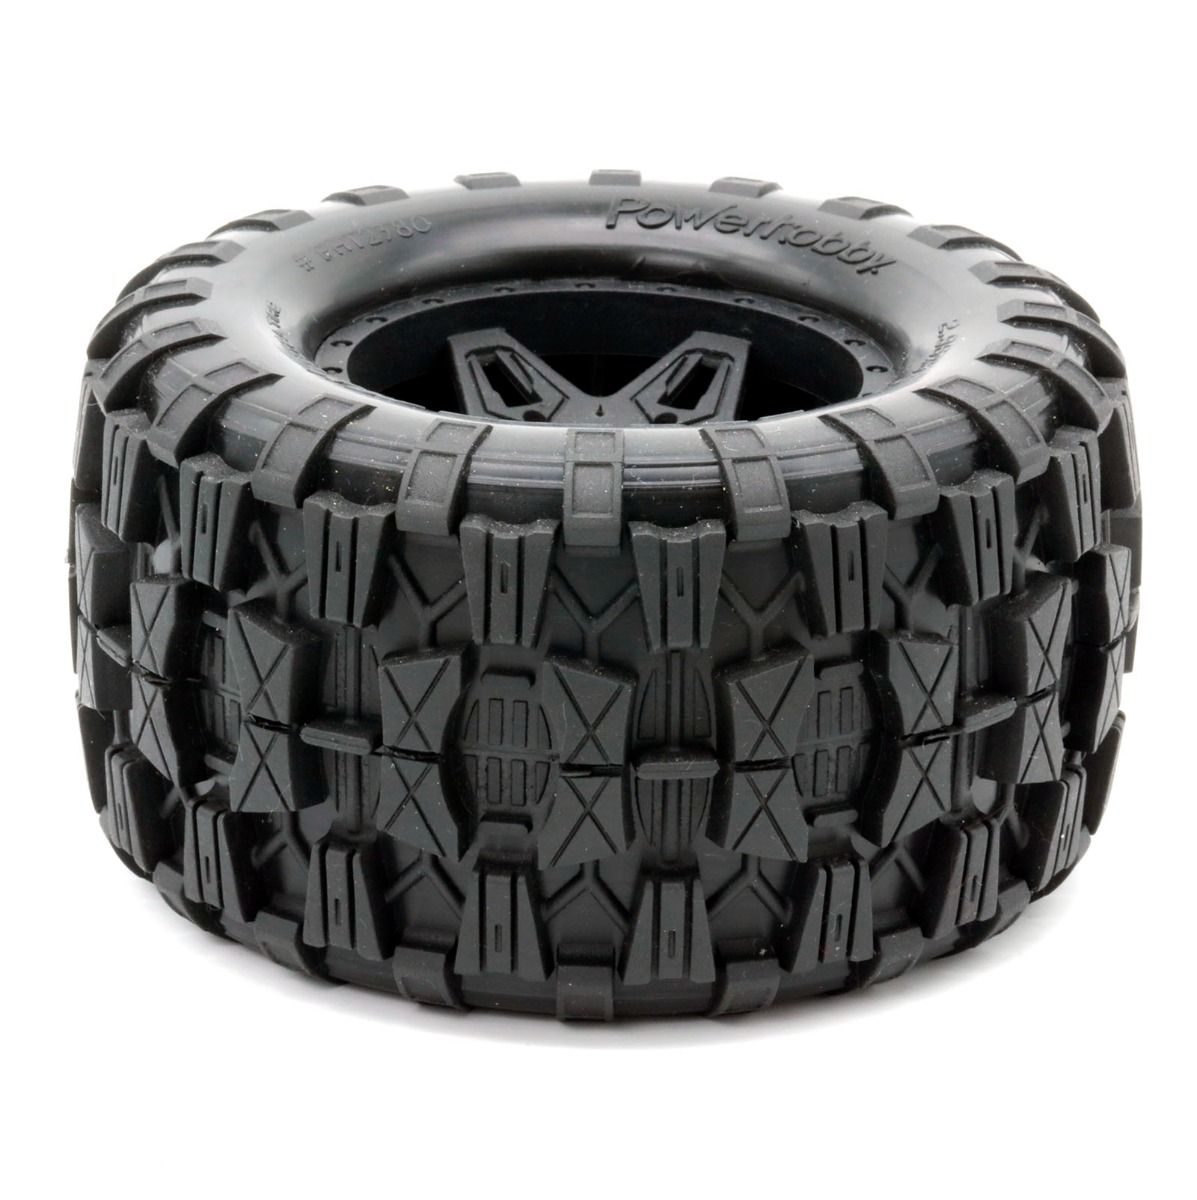 Powerhobby Raptor MX Belted All Terrain Tires Mounted 17mm FOR Traxxas Maxx